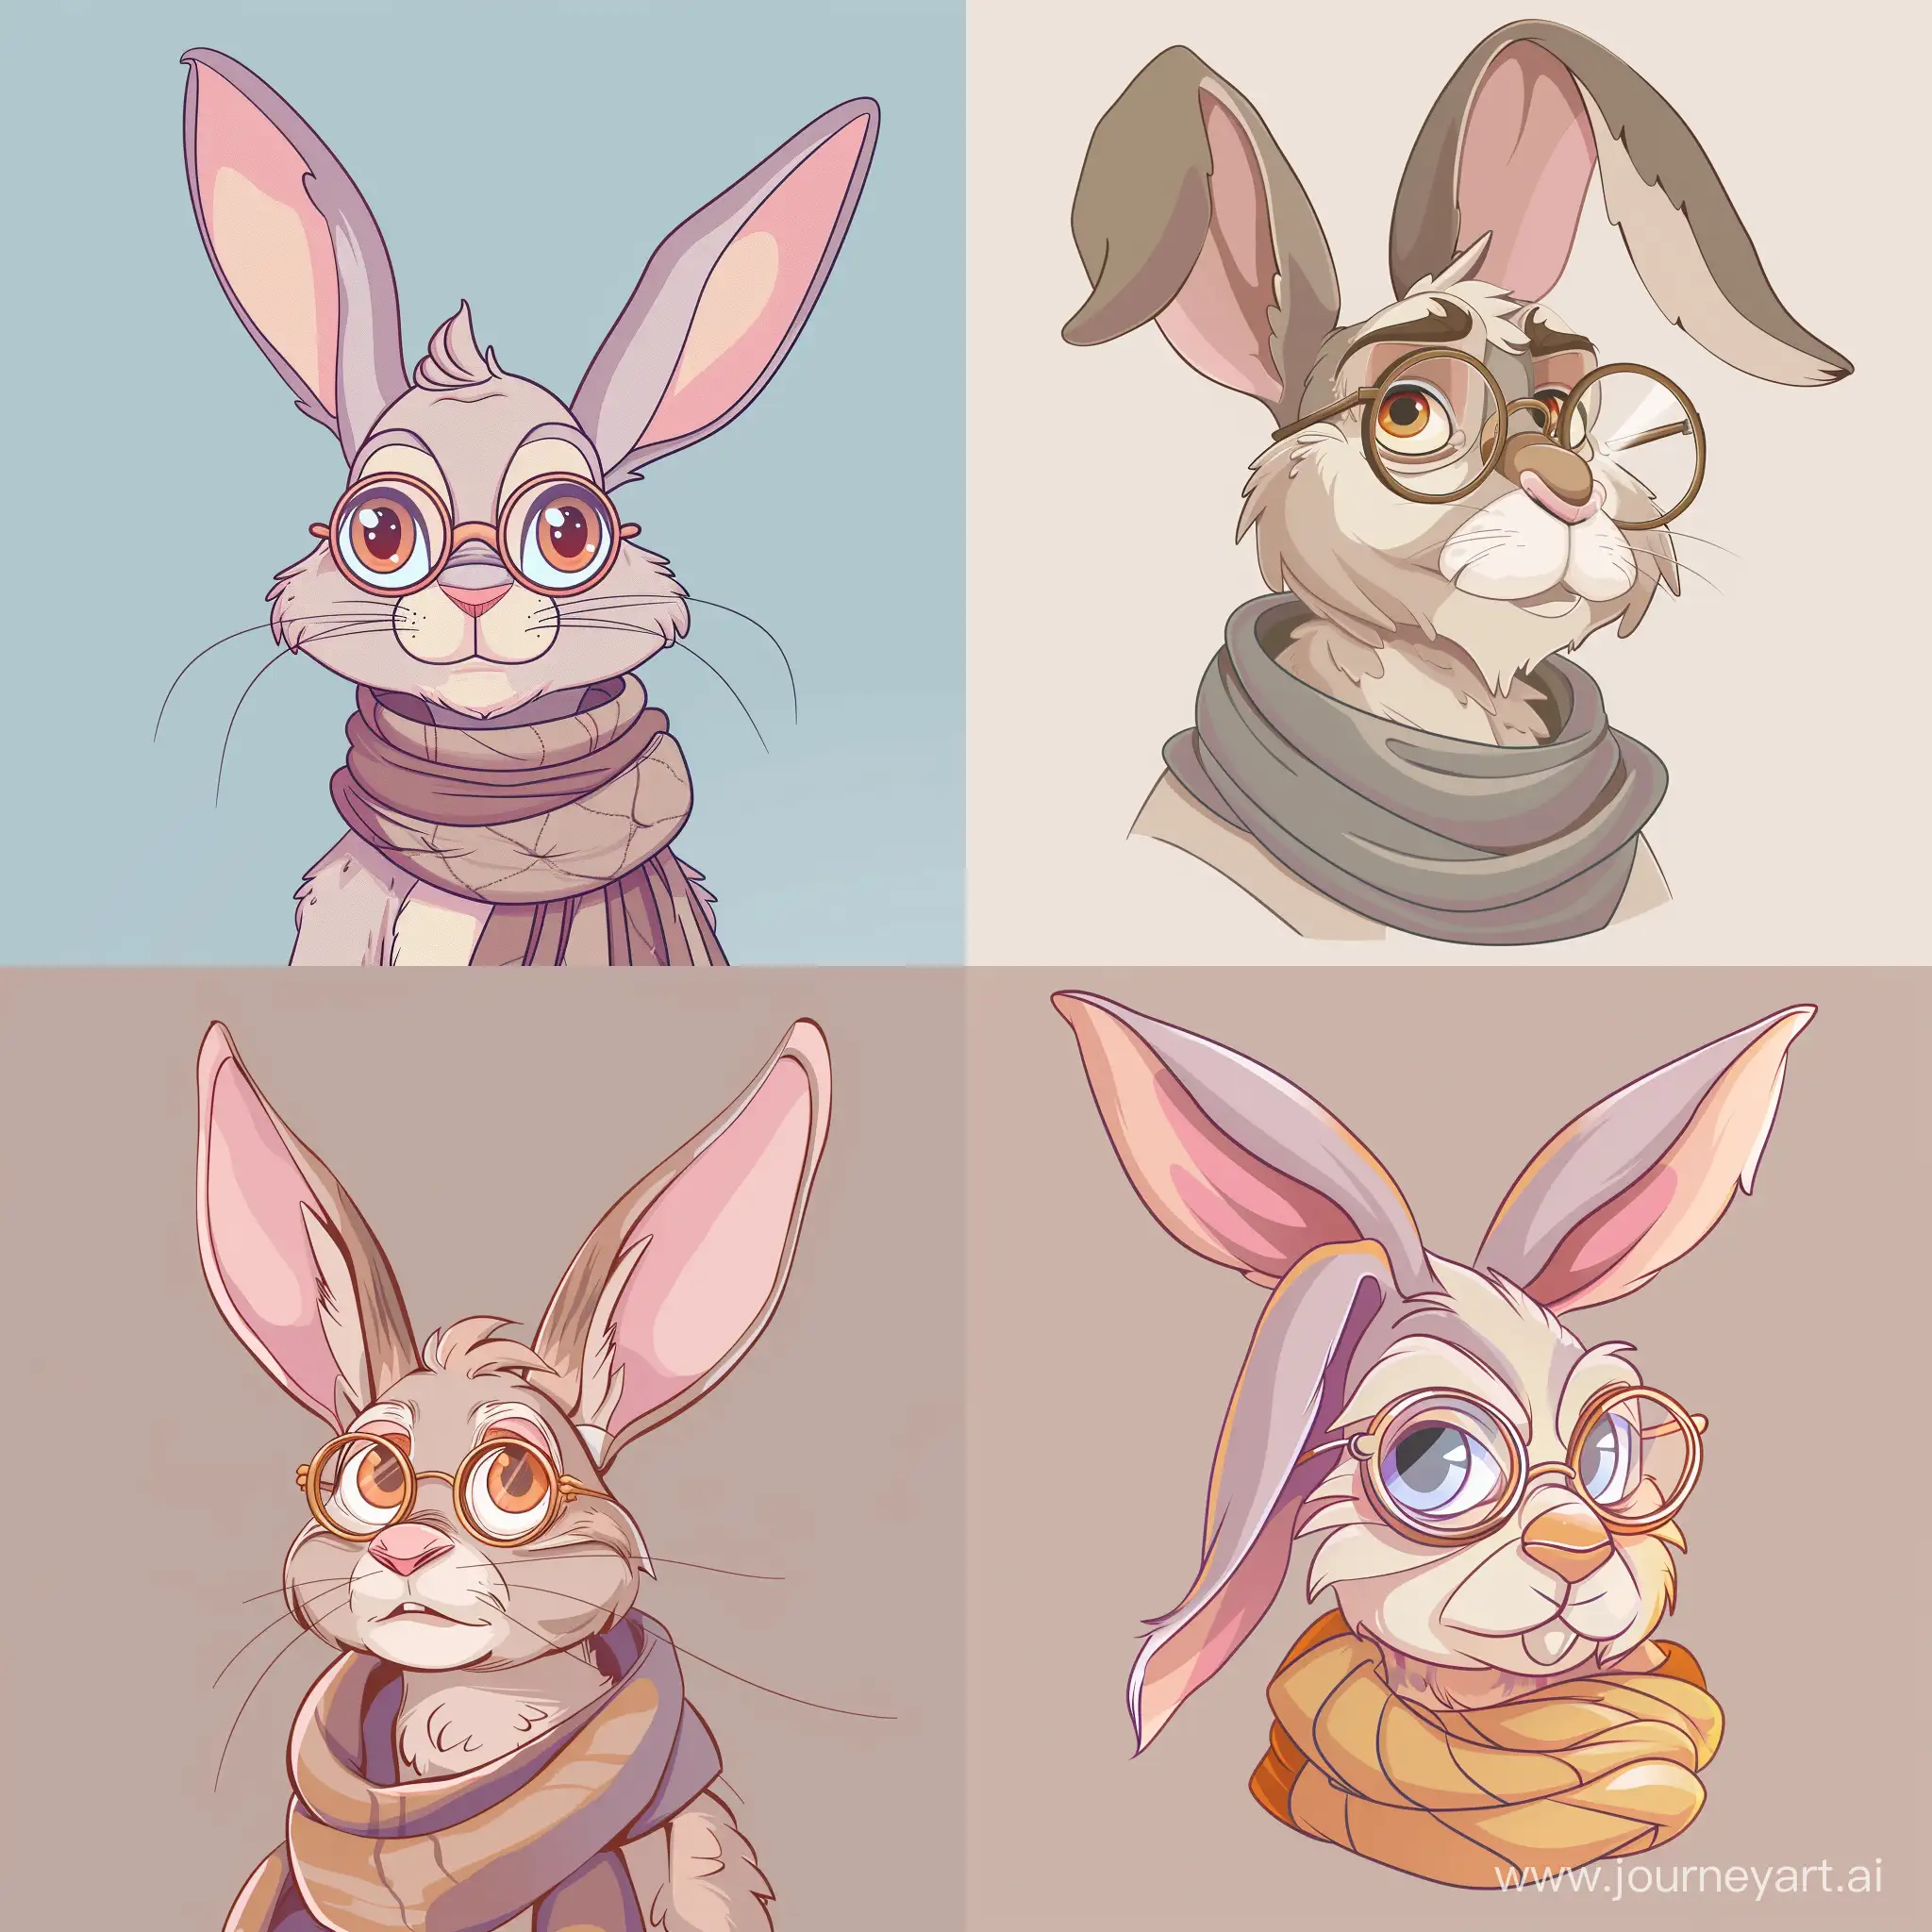 Wise-Elderly-Rabbit-with-Spectacles-and-Cozy-Scarf-Illustration